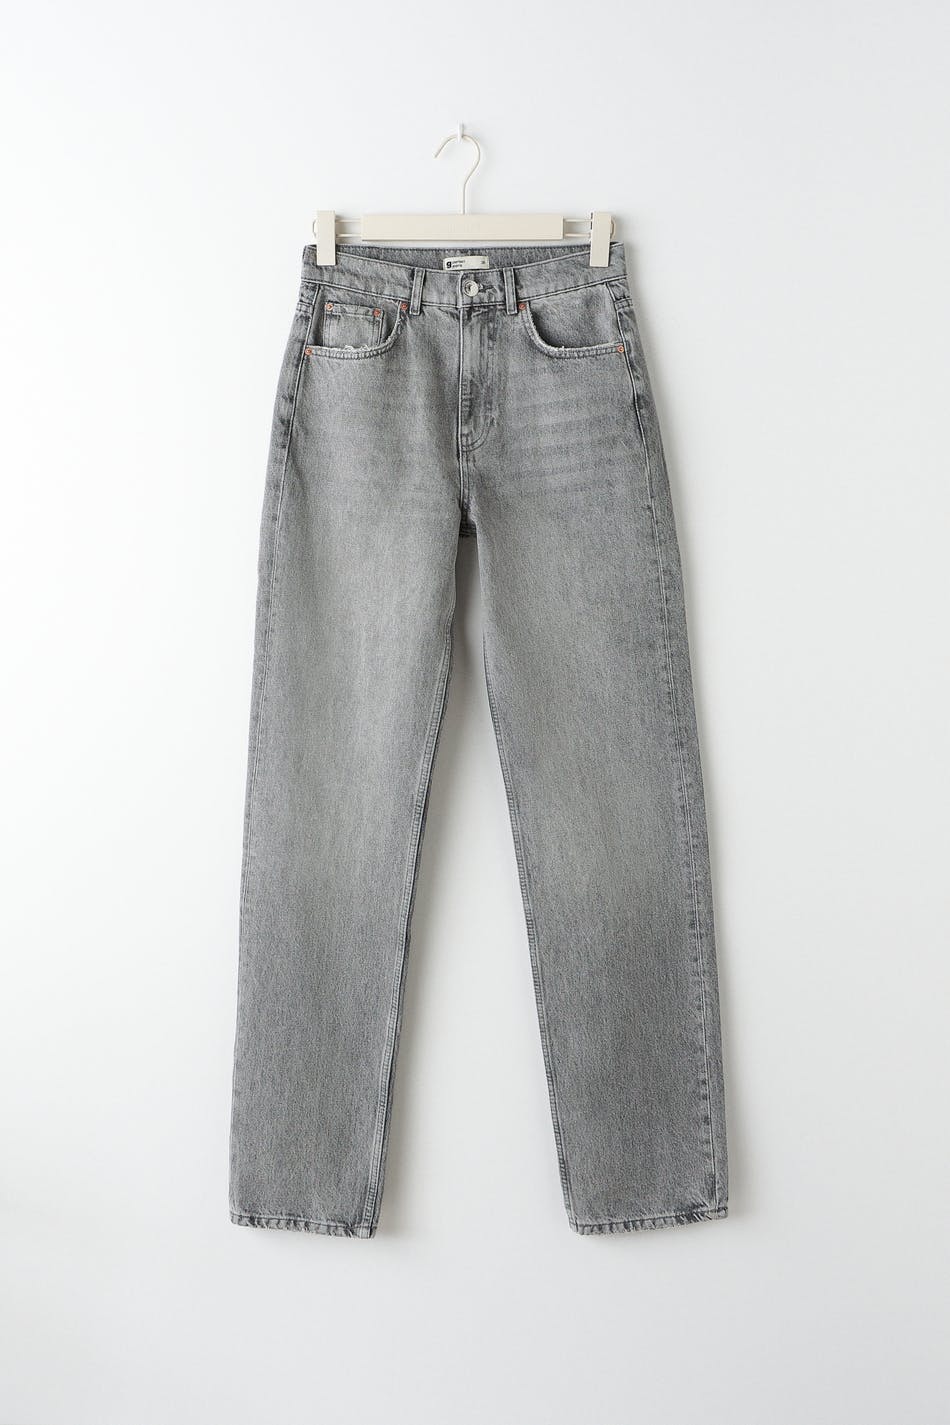 90s tall jeans, Gina Tricot